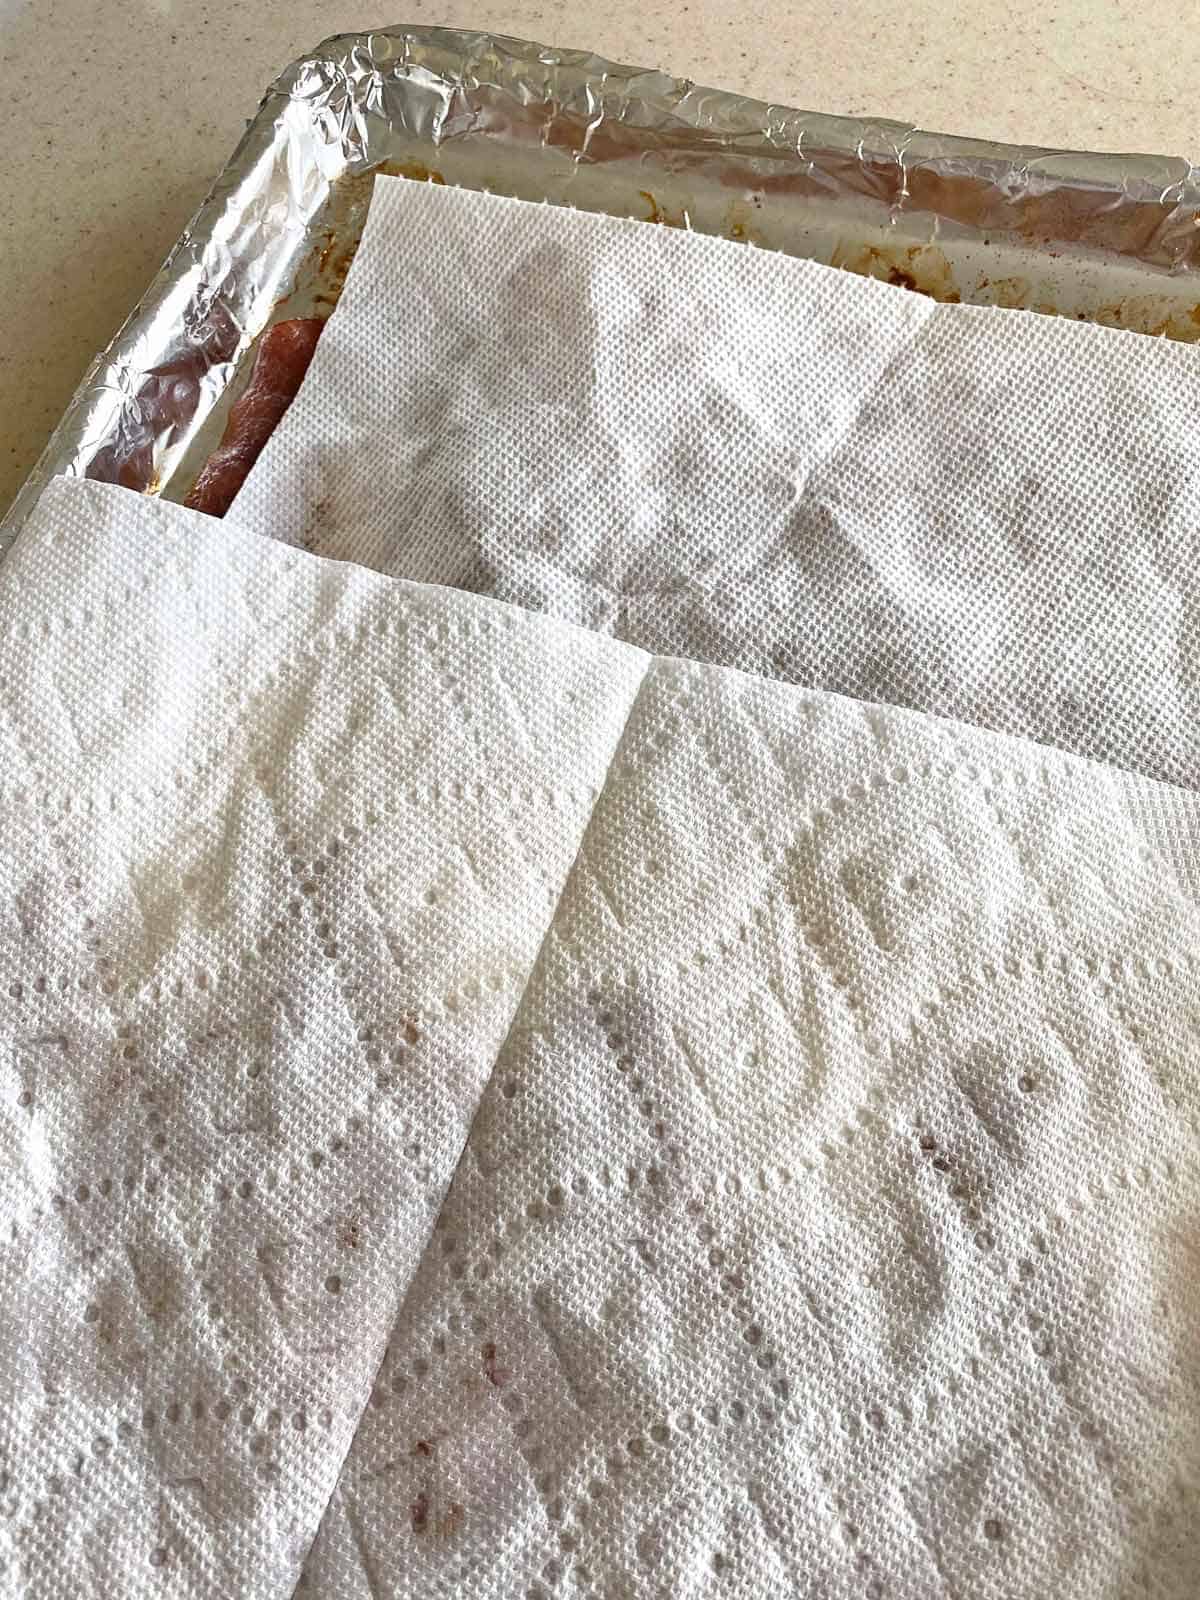 Blotting excess grease from crack bacon with paper towels.